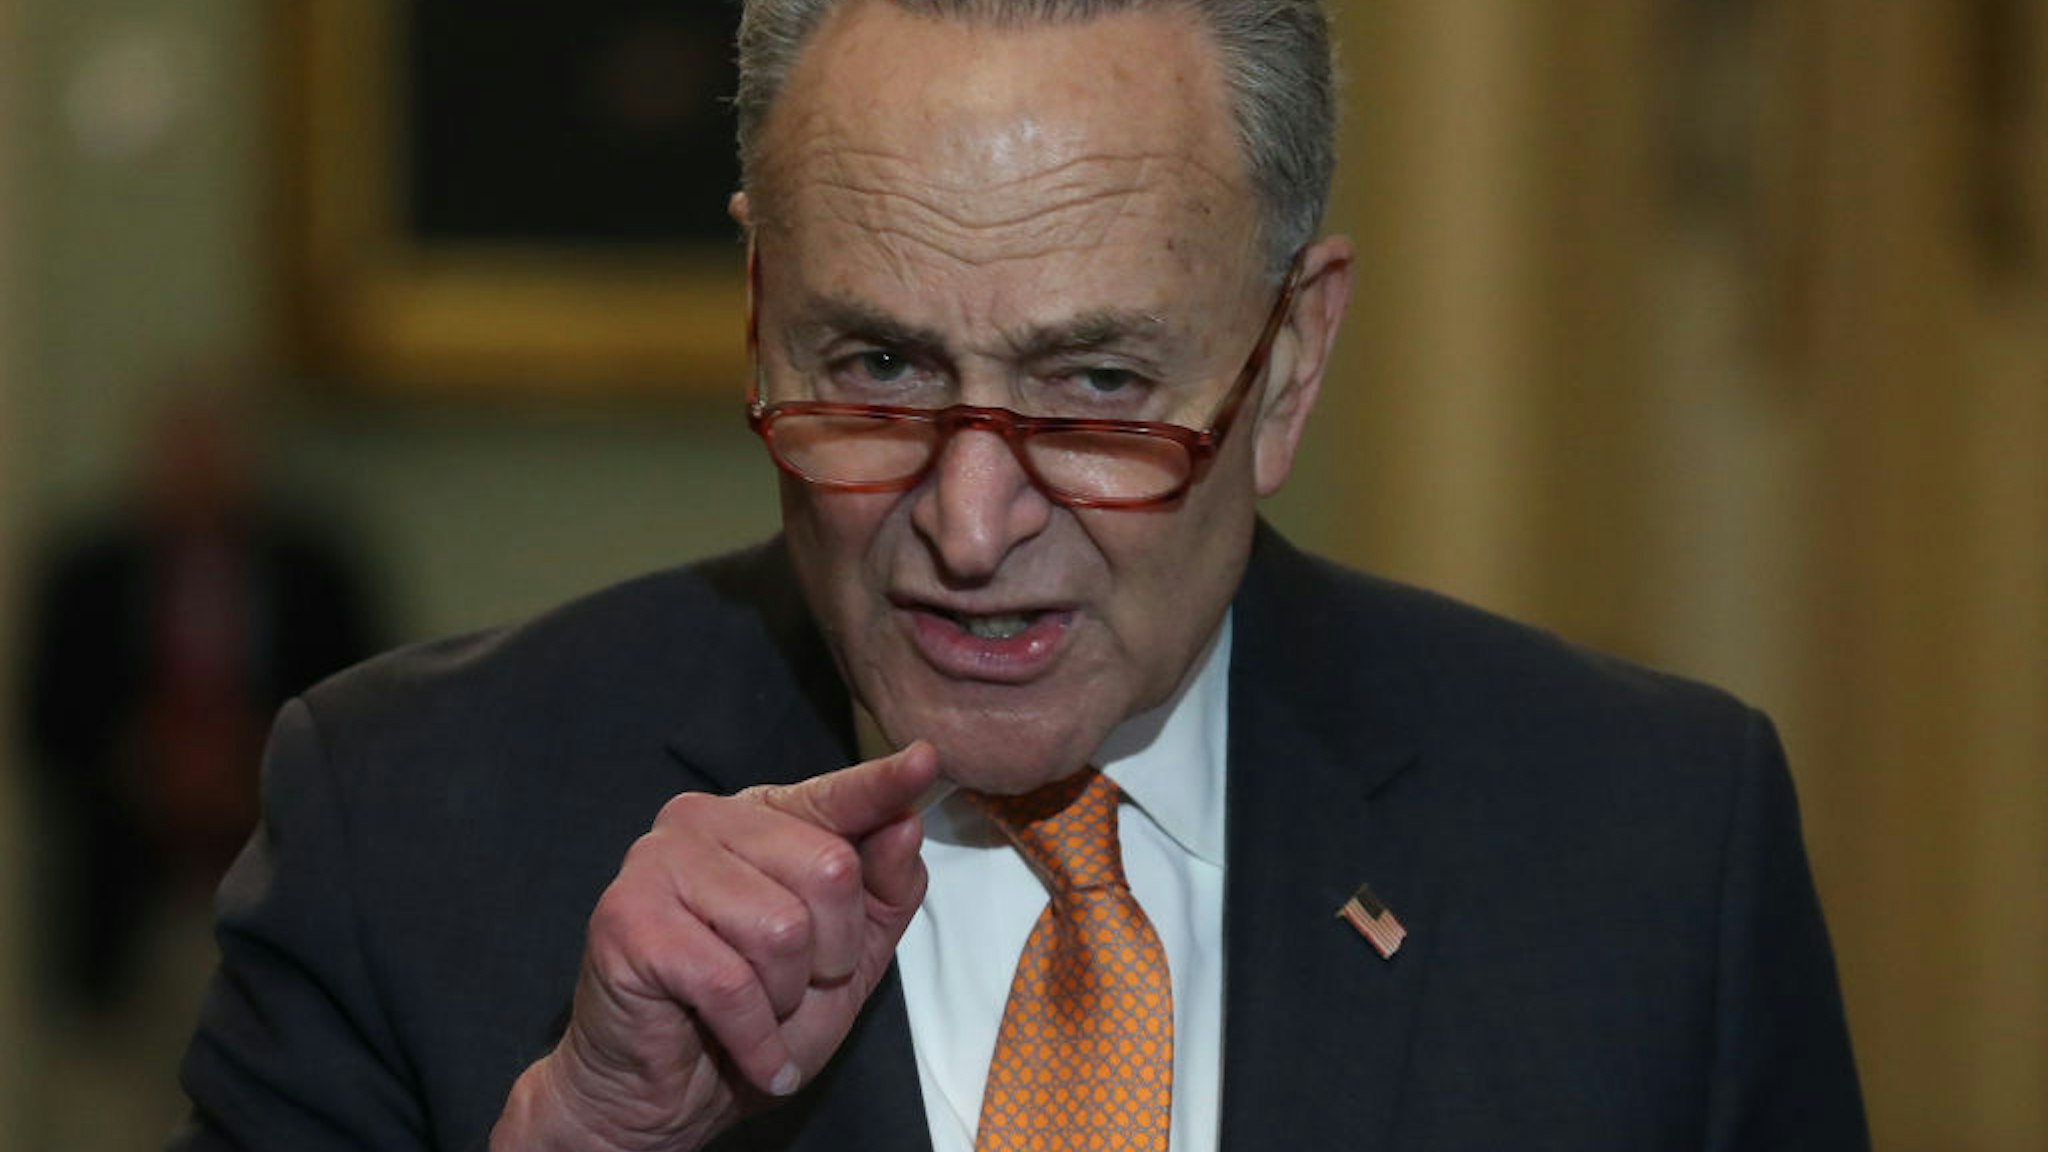 Senate Minority Leader Charles Schumer (D-NY) speaks to the media after attending the Senate Democrats policy luncheon on Capitol Hill, on December 17, 2019